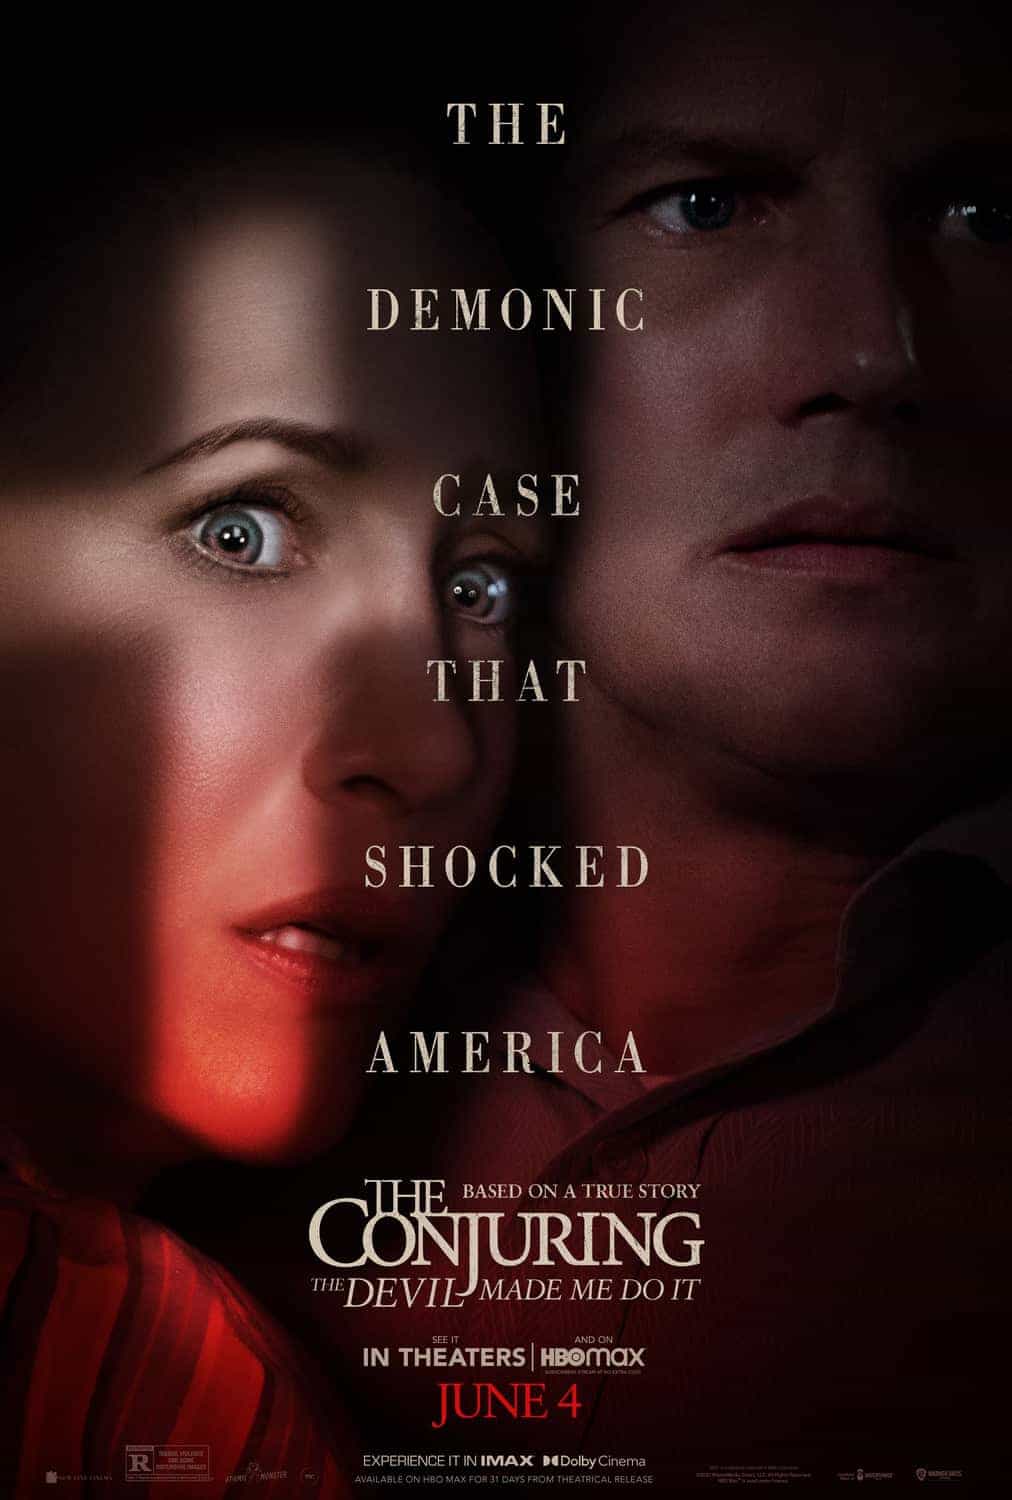 World Box Office Weekend Report 11th - 13th June 2021:  A static top 3 has The Conjuring 3 remaining at number 1 while In The Heights enter at number 5